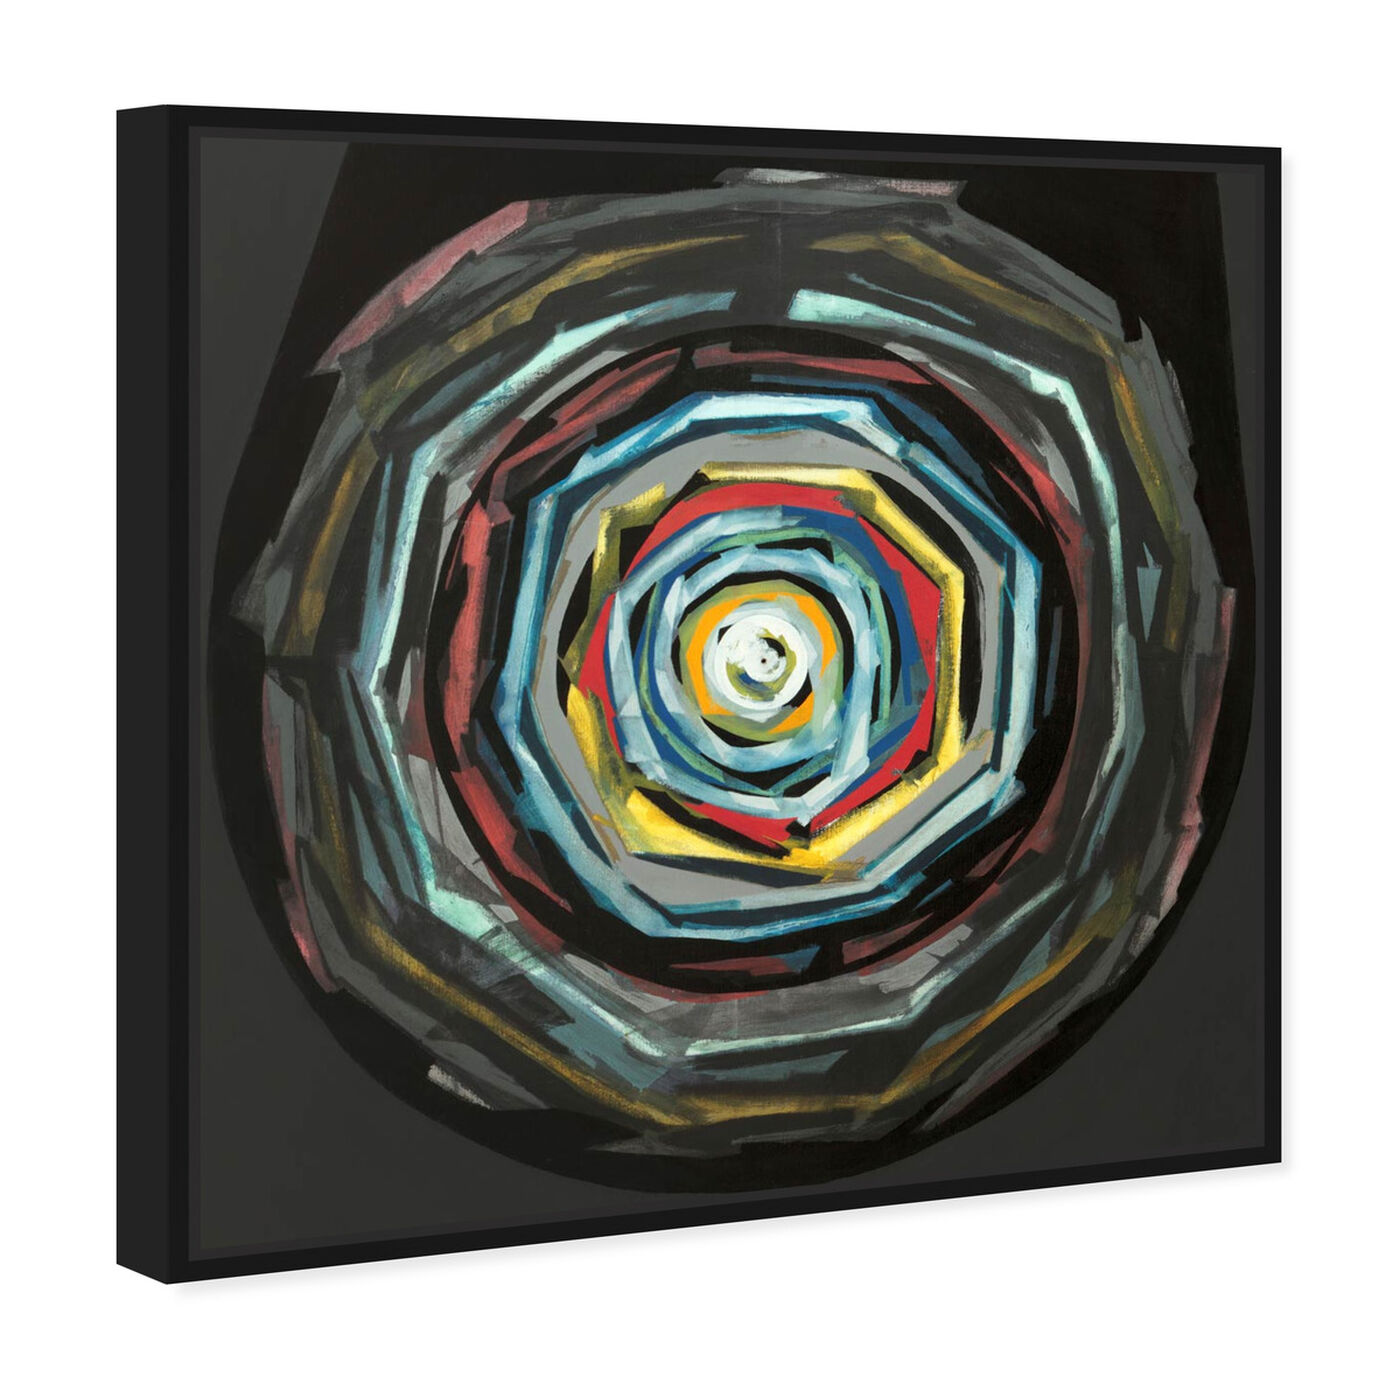 Angled view of Sai - Pictis Spiralis II featuring abstract and paint art.